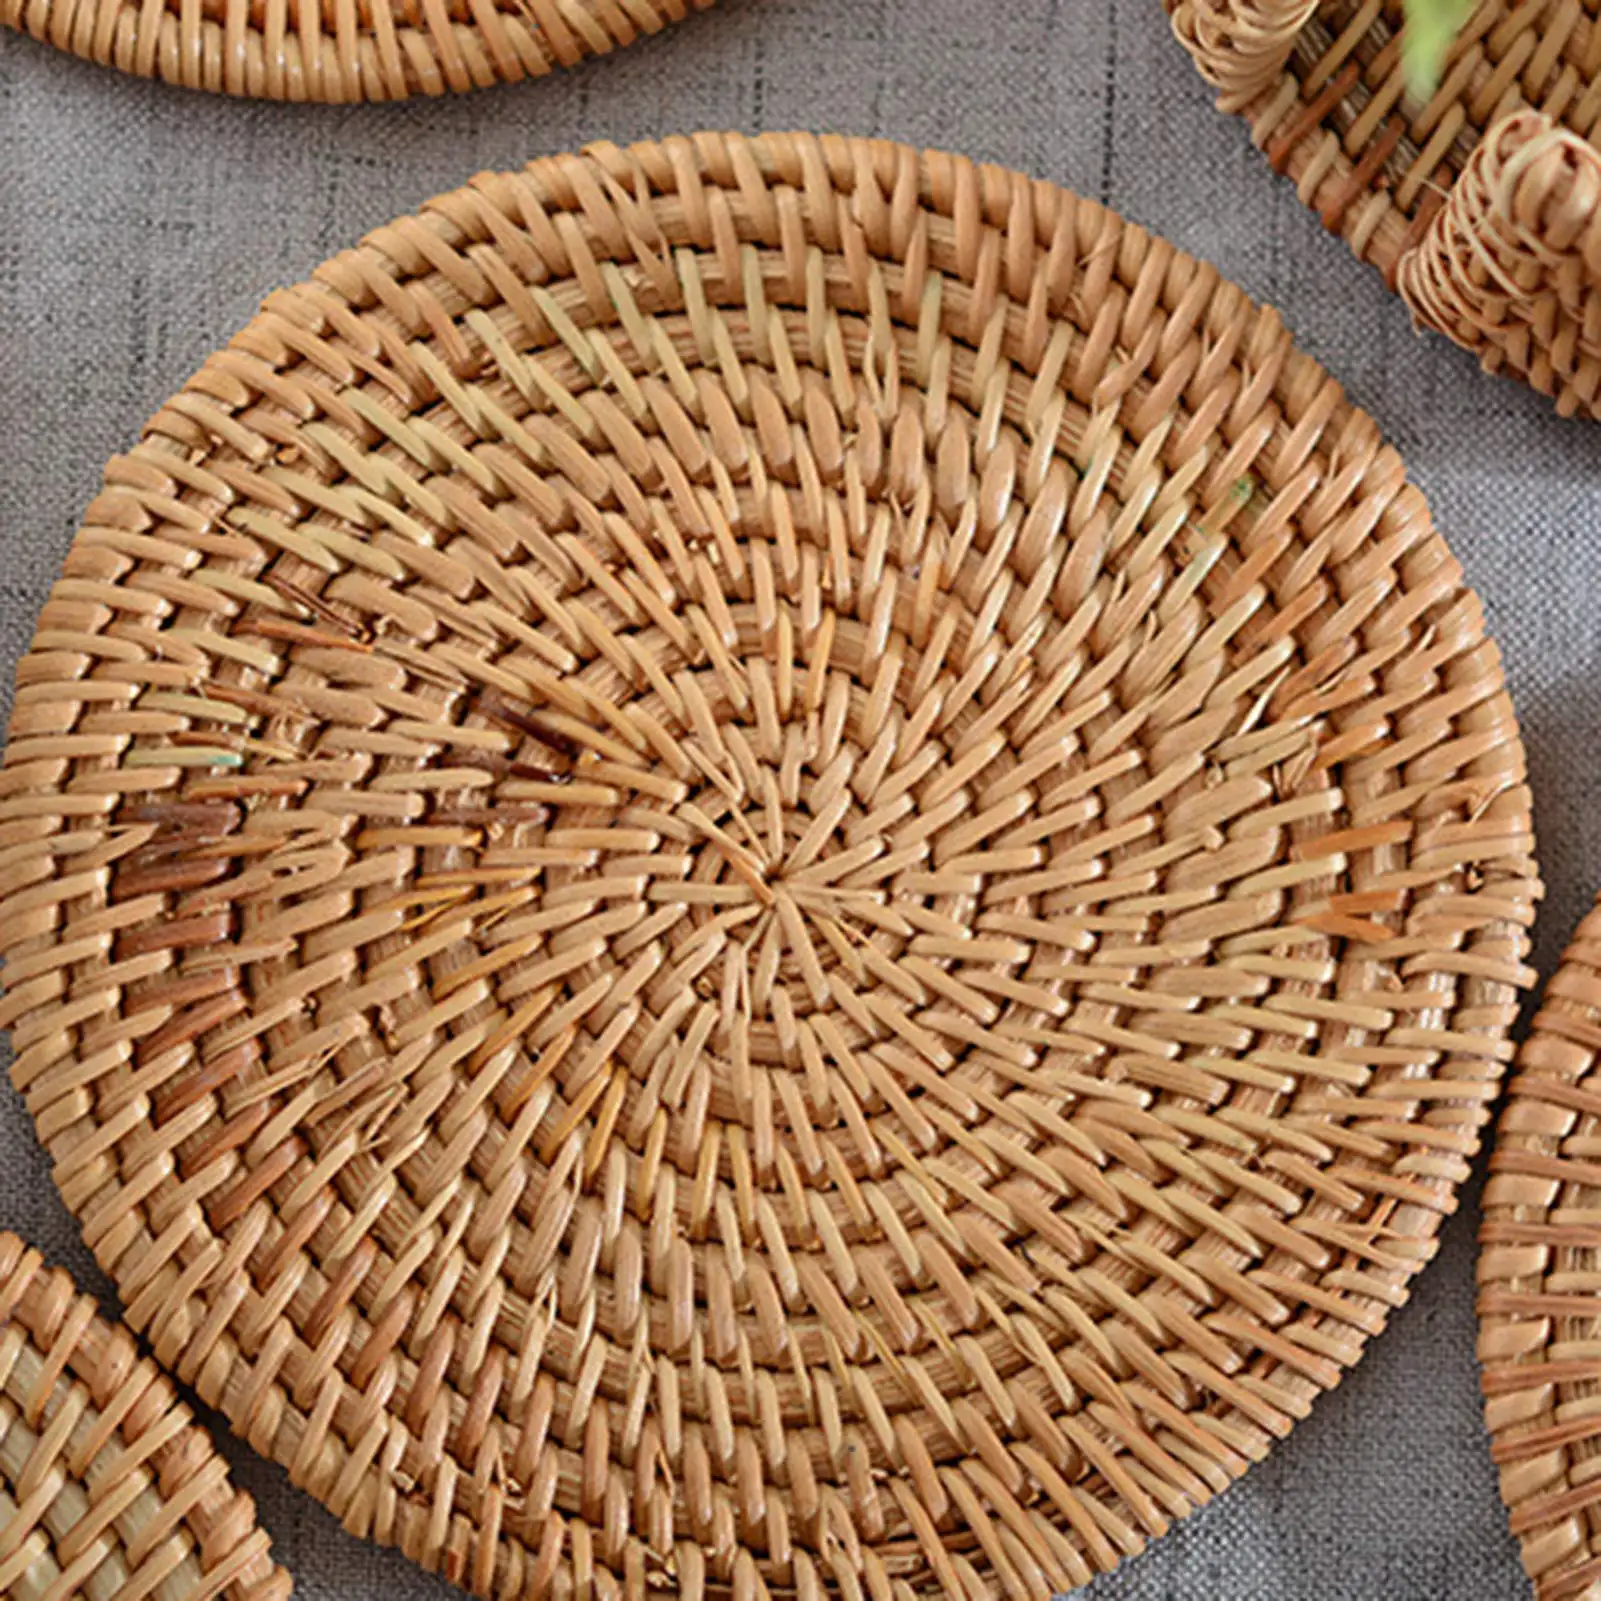 Handmade Natural Rattan Coasters for Drinks Wicker Boho Coasters Woven Coasters for Drinks Set of 6 with Holder